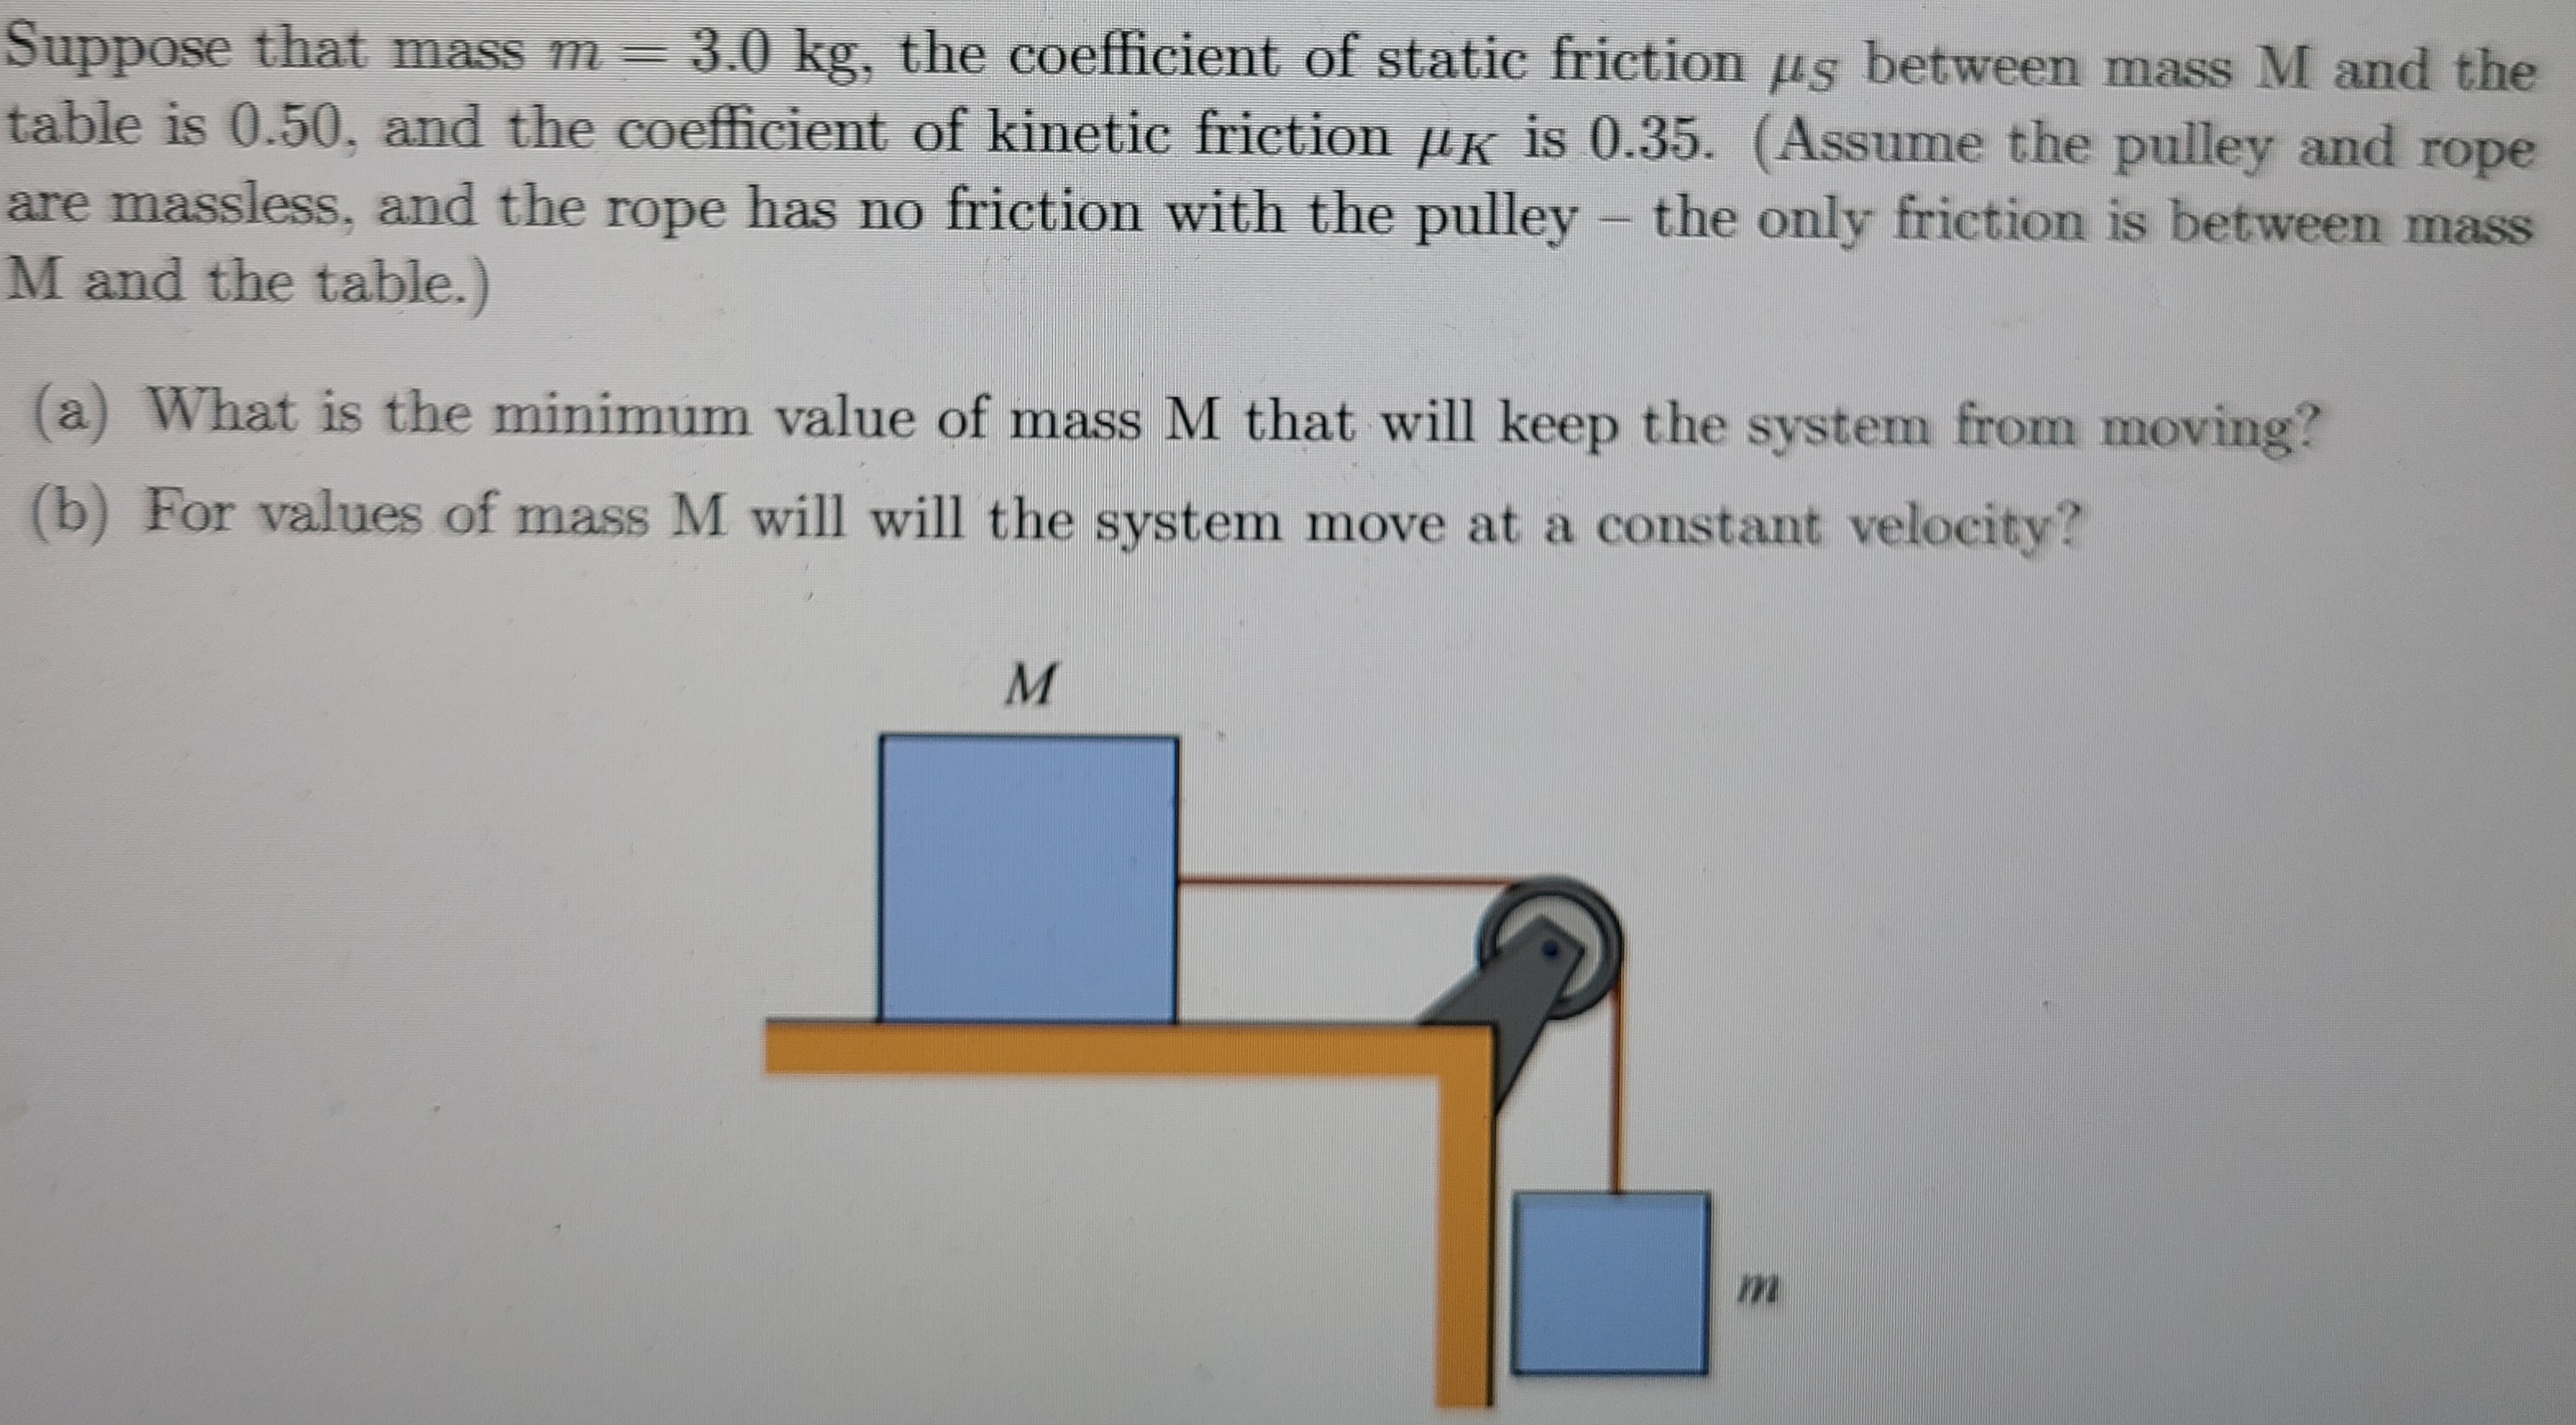 Suppose that mass m = 3.0 kg, the coefficient of static friction us between mass M and the
table is 0.50, and the coefficient of kinetic friction µK is 0.35. (Assume the pulley and rope
are massless, and the rope has no friction with the pulley - the only friction is between mass
M and the table.)
(a) What is the minimum value of mass M that will keep the system from moving?
(b) For values of mass M will will the system move at a constant velocity?
